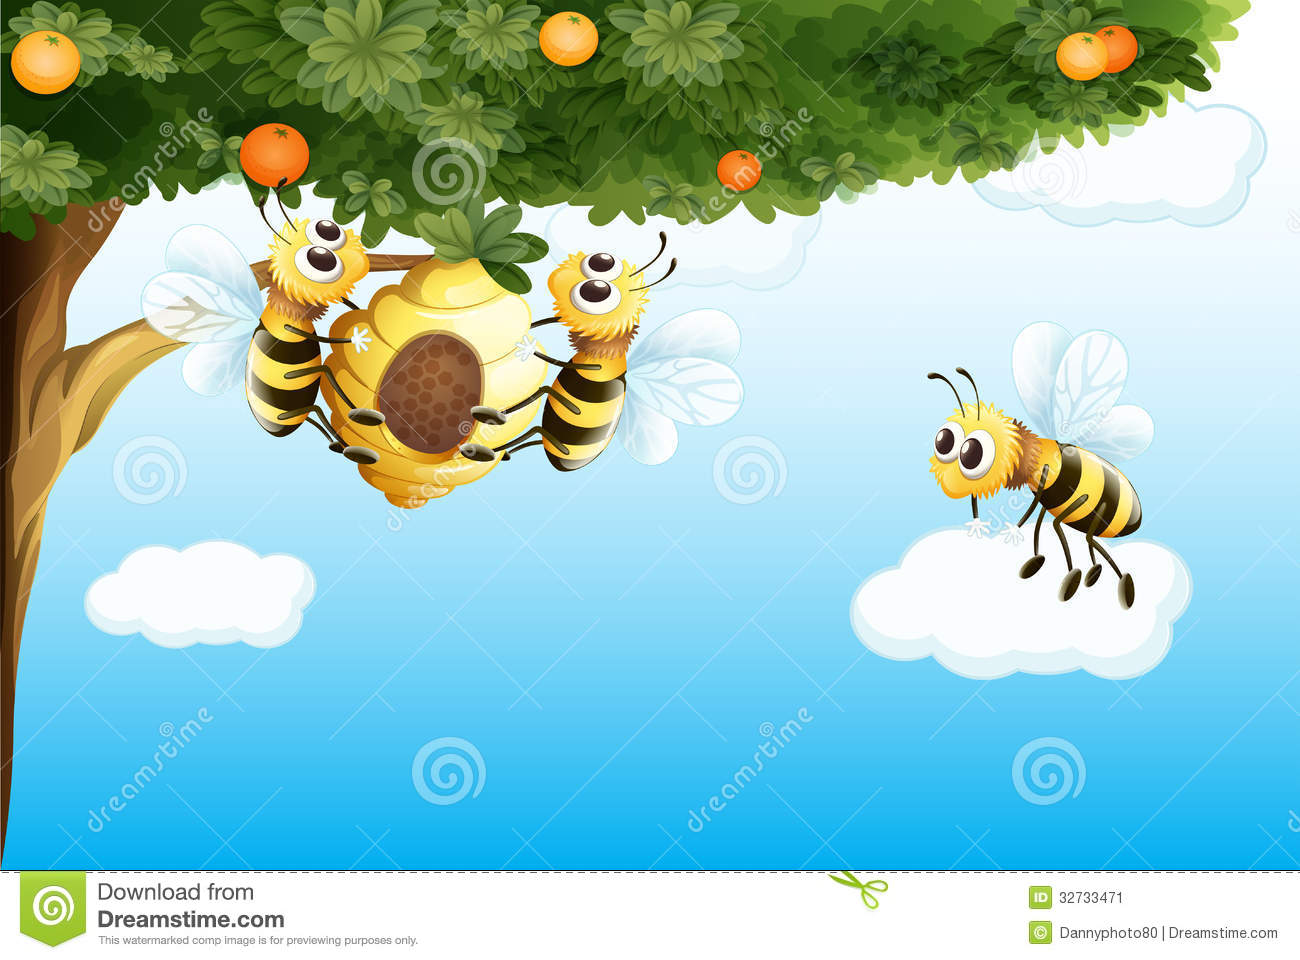 Three Bees With A Beehive Stock Image   Image  32733471